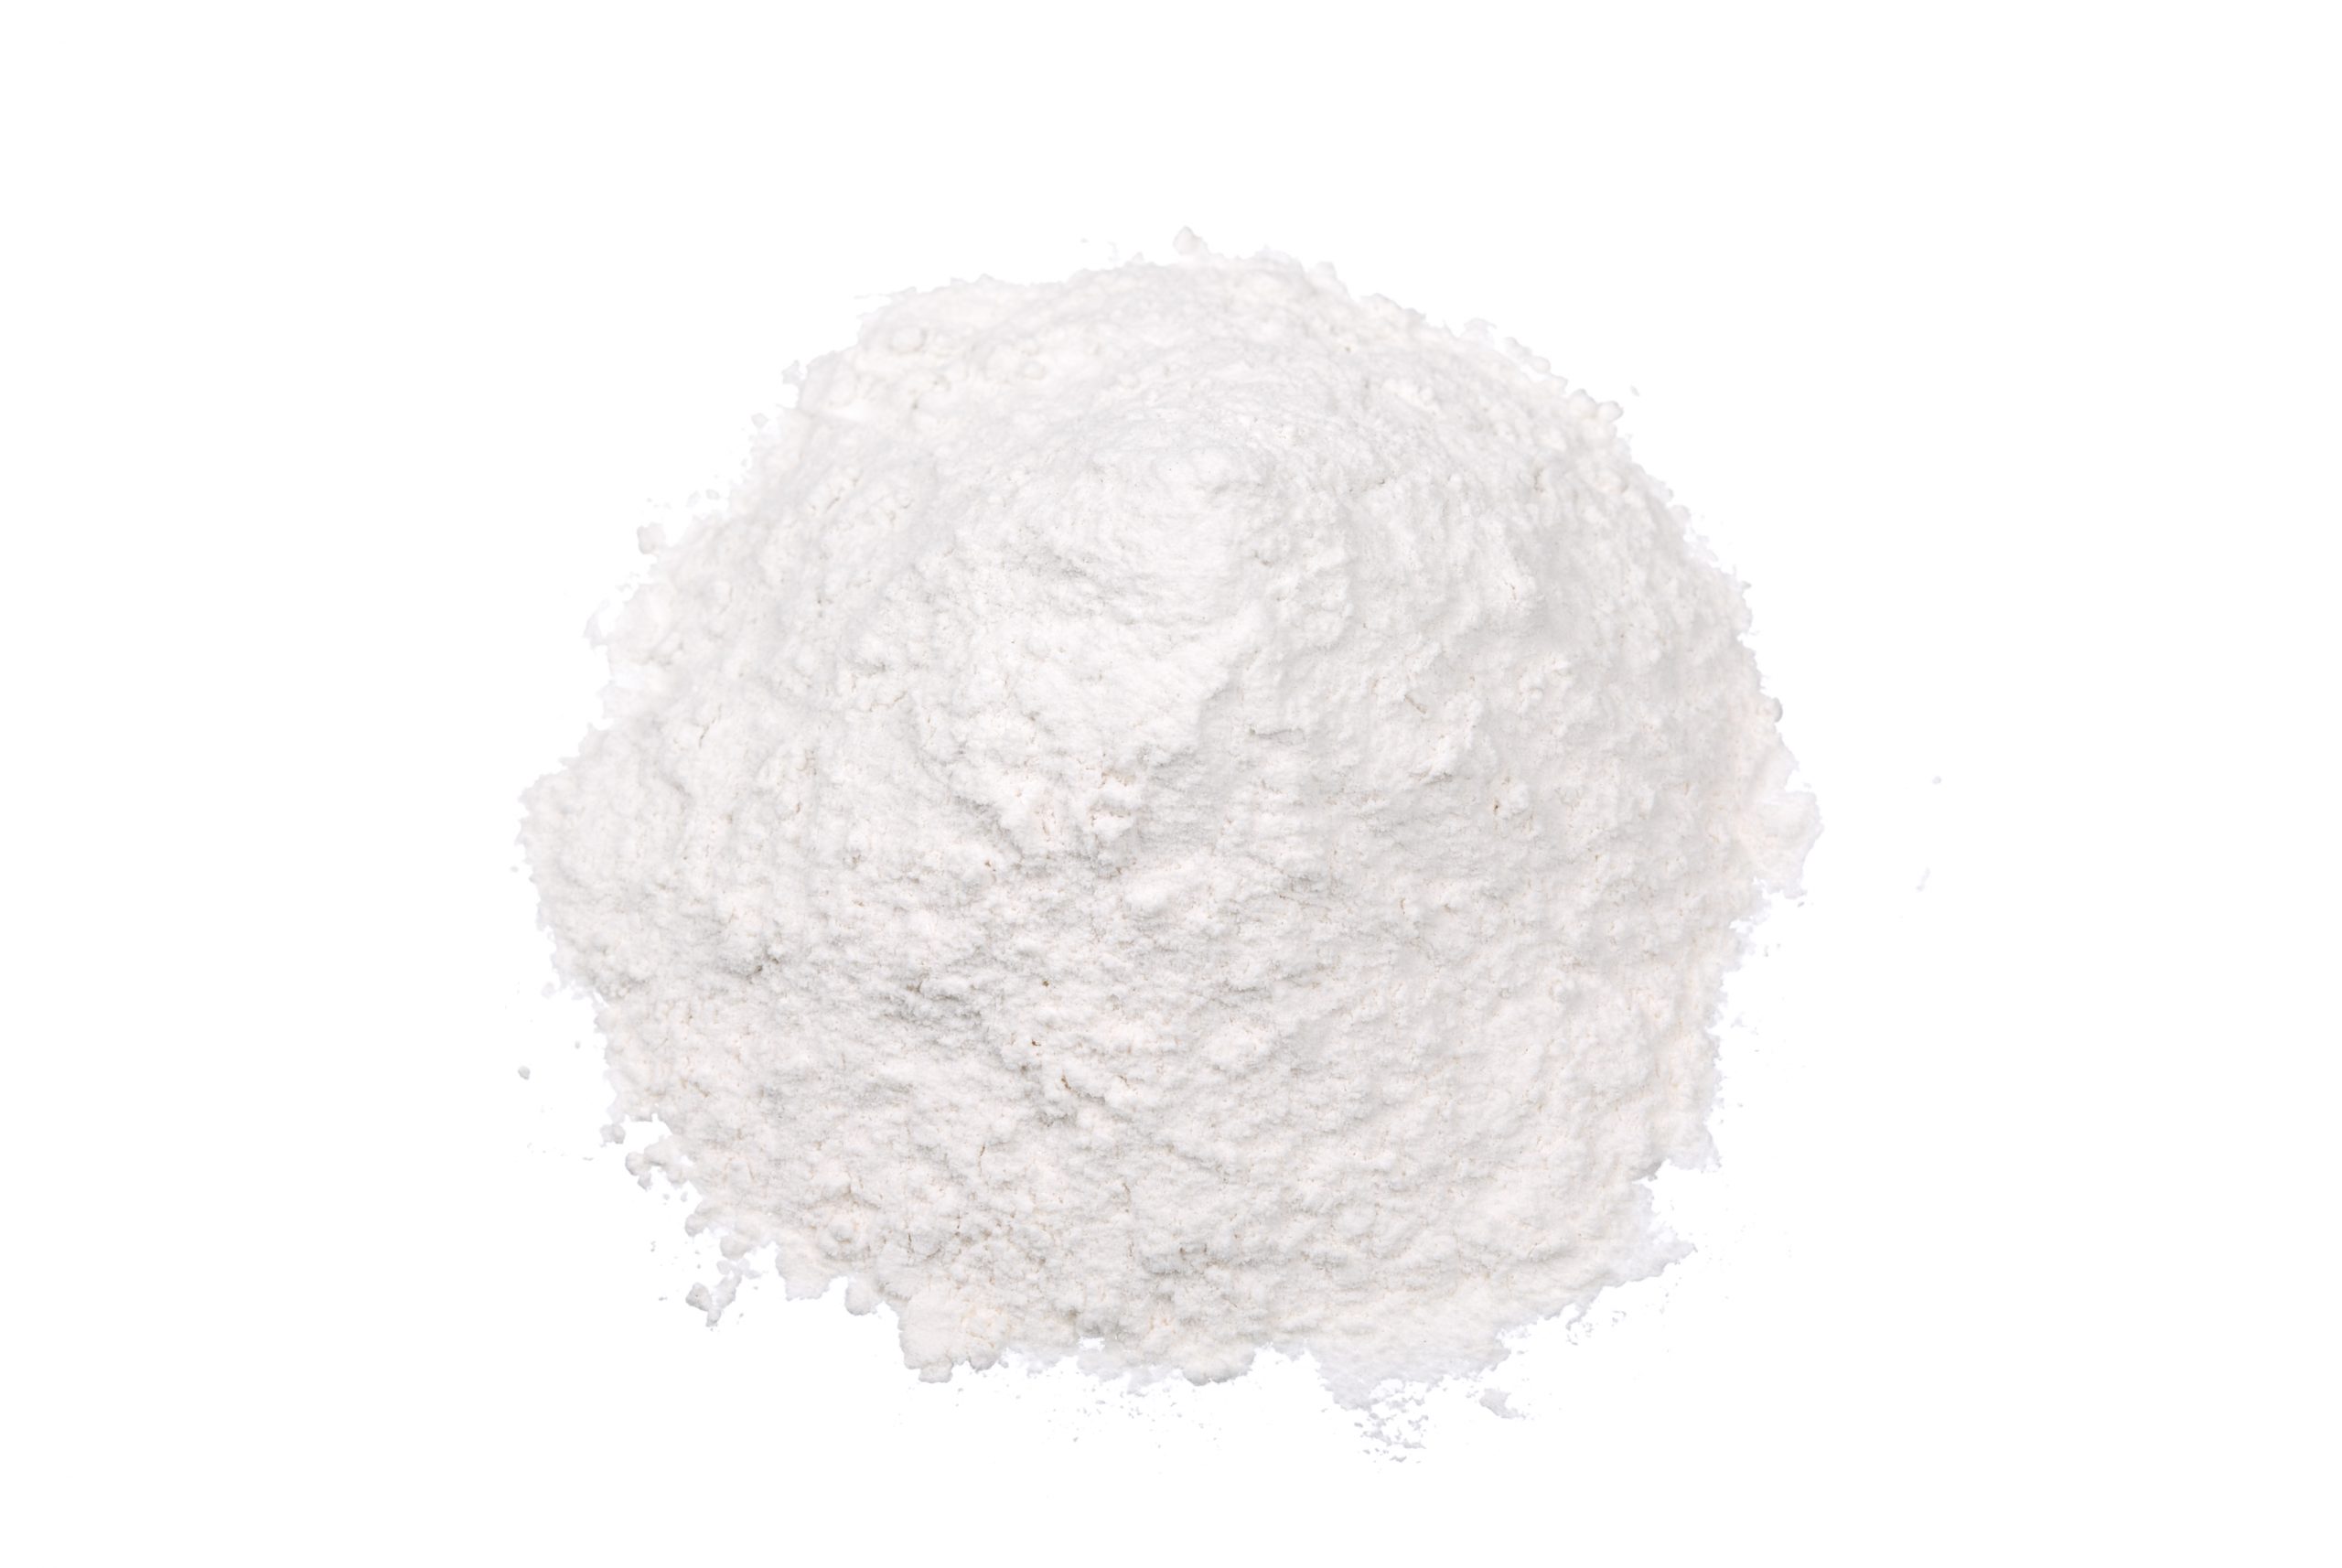 Vinpocetine powder will give you what you want